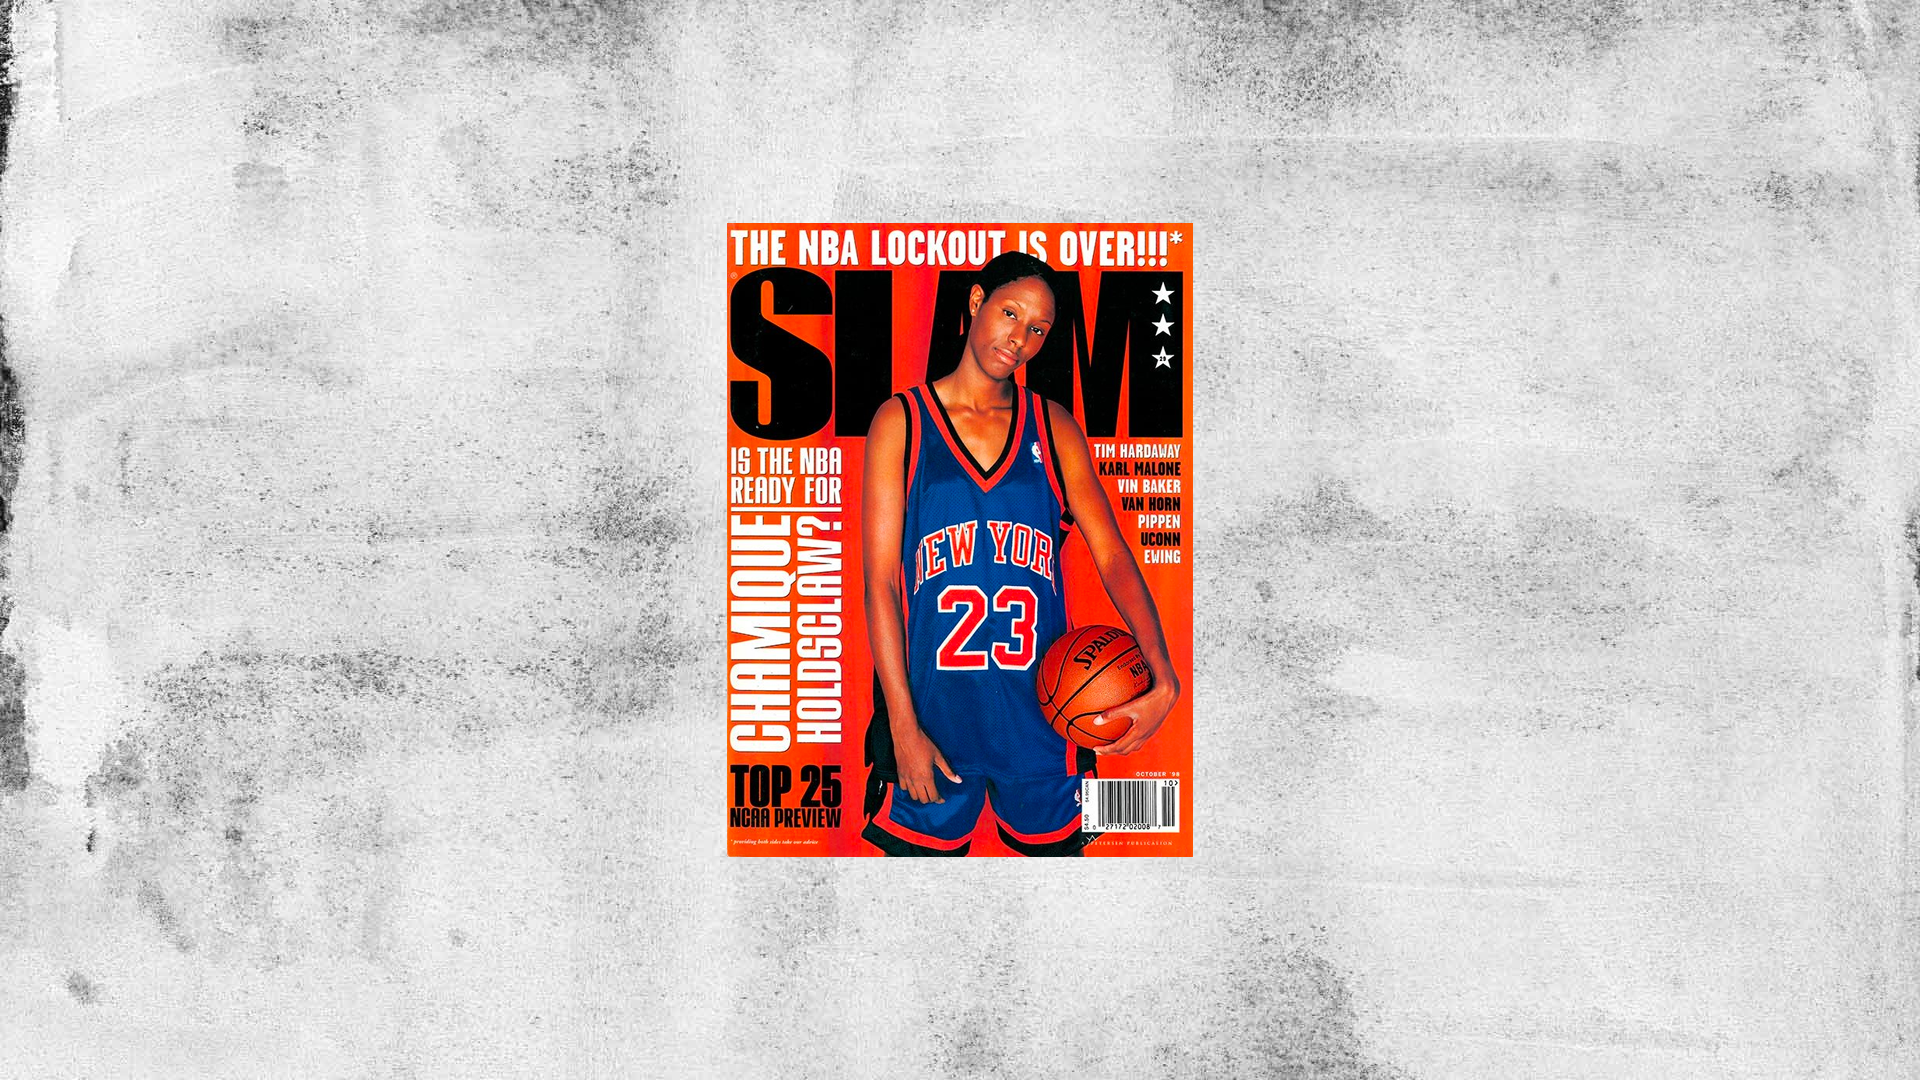 WSLAM Archive: Looking Back at SLAM 29 and How Chamique Holdsclaw Redefined the Game